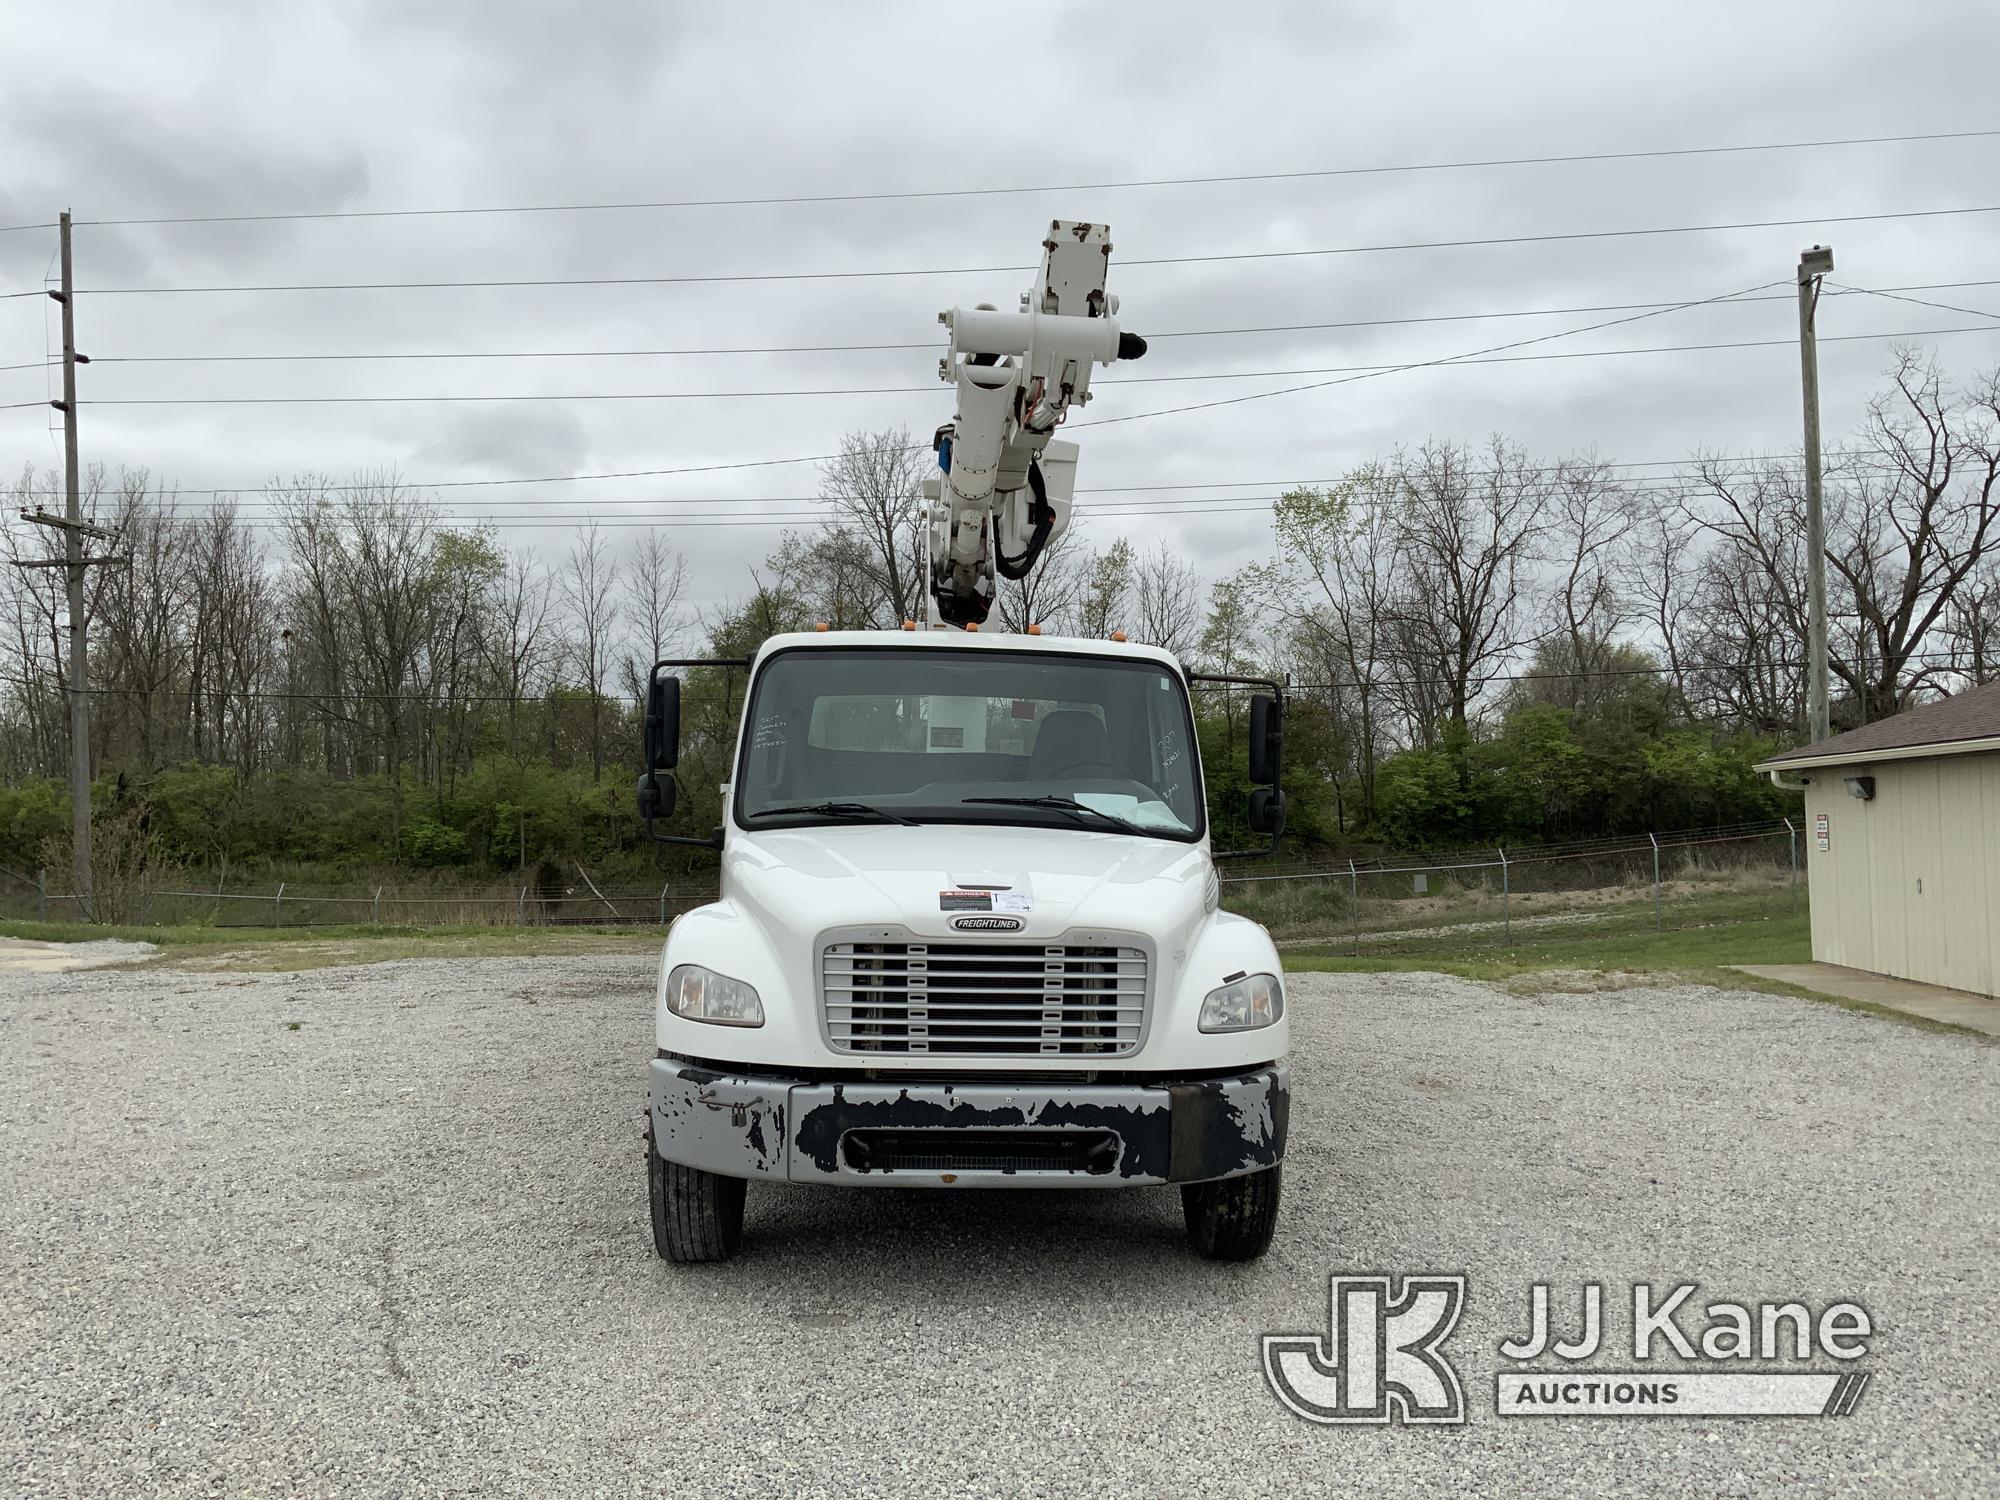 (Fort Wayne, IN) Altec TA40, Articulating & Telescopic Bucket Truck mounted behind cab on 2017 Freig